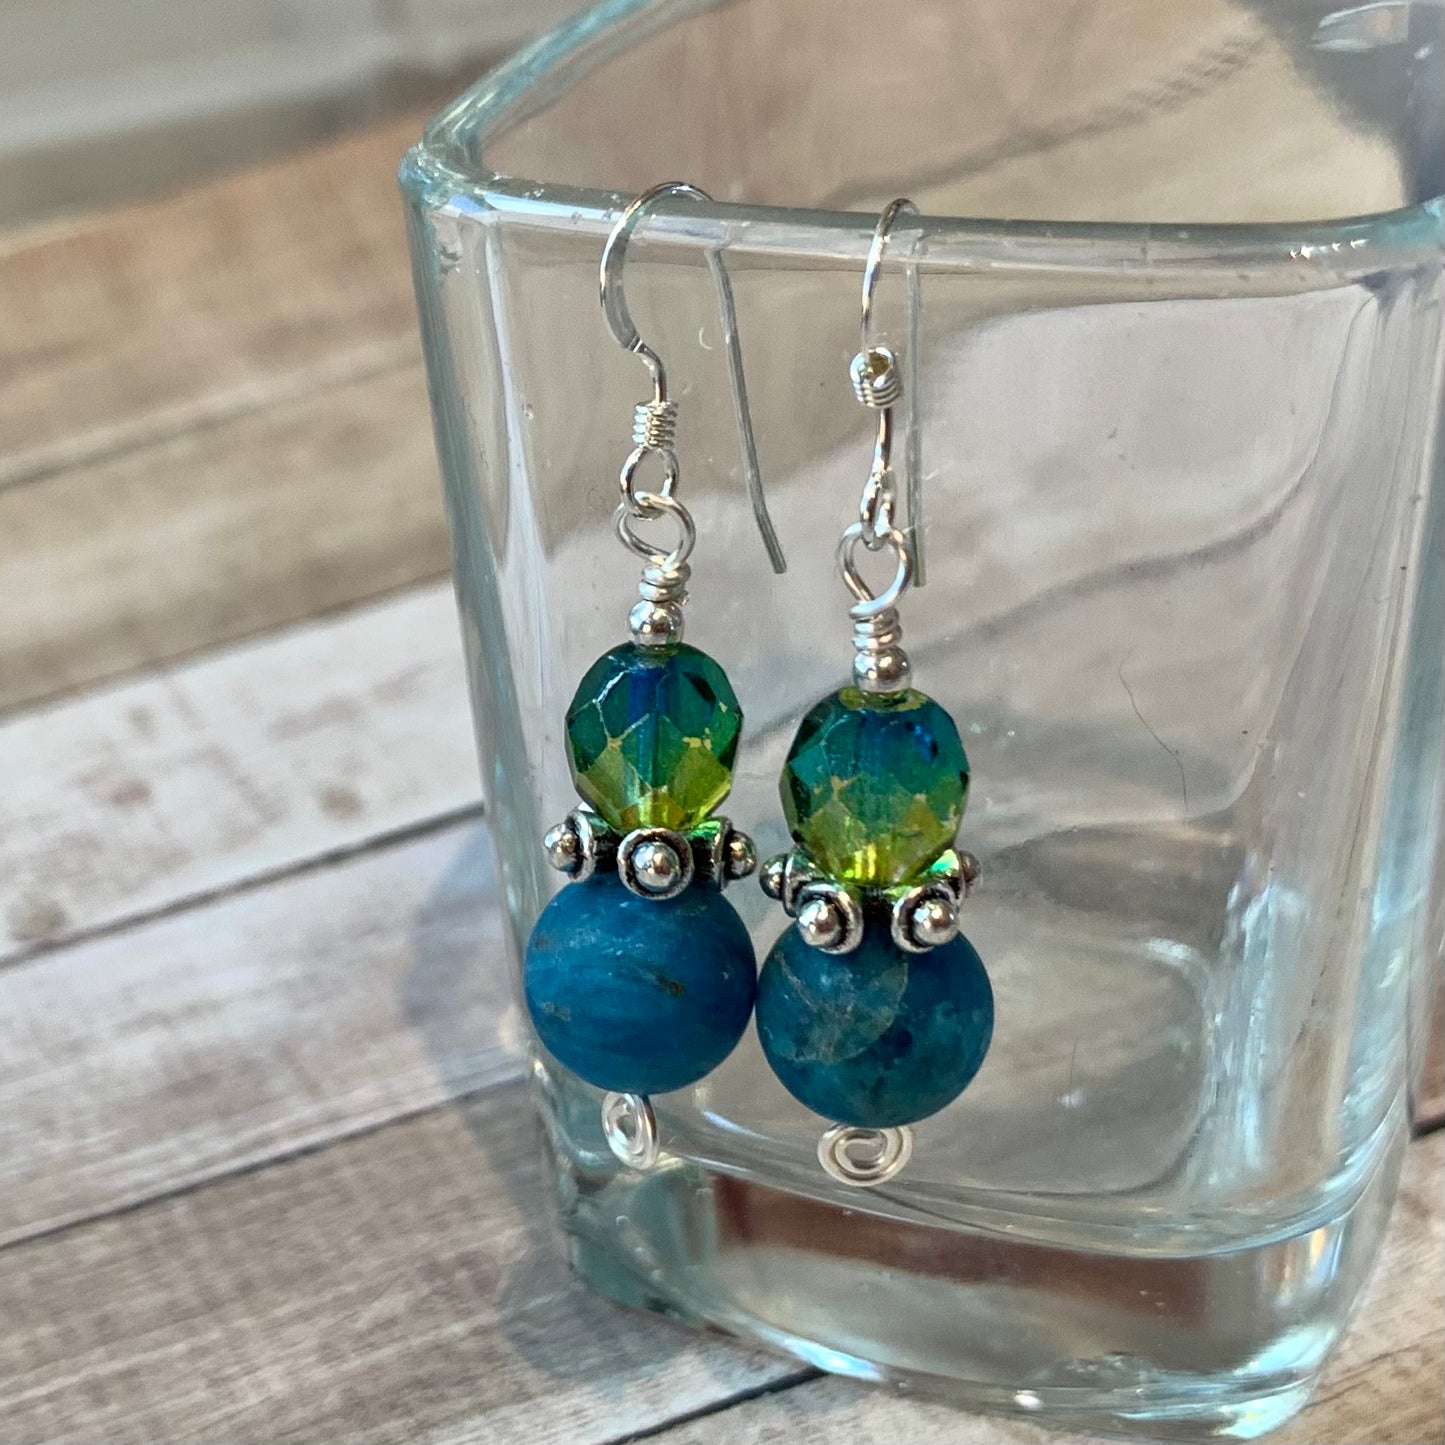 Tiny Evil Genius Earrings: apatite and glass